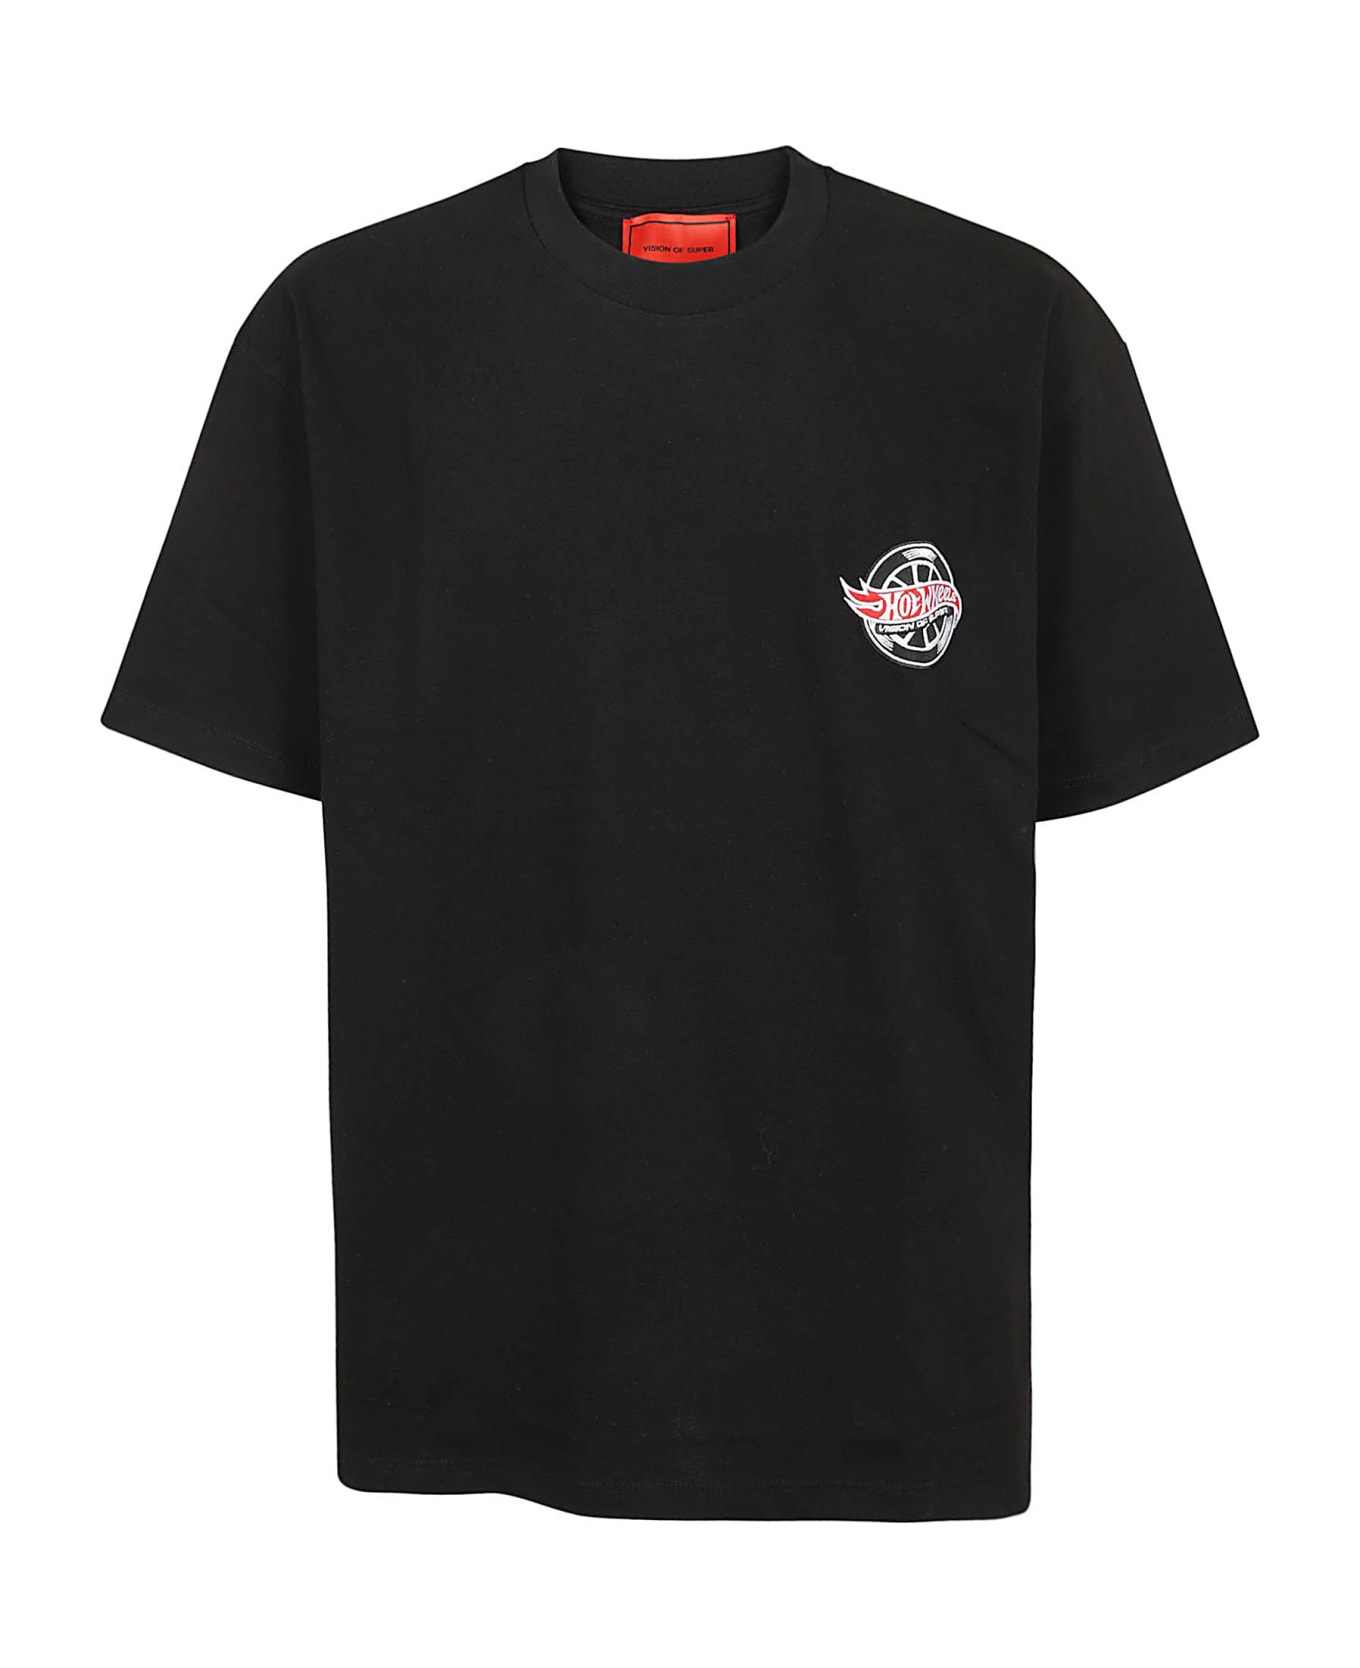 Vision of Super Black T-shirt With Red Car Print - Black